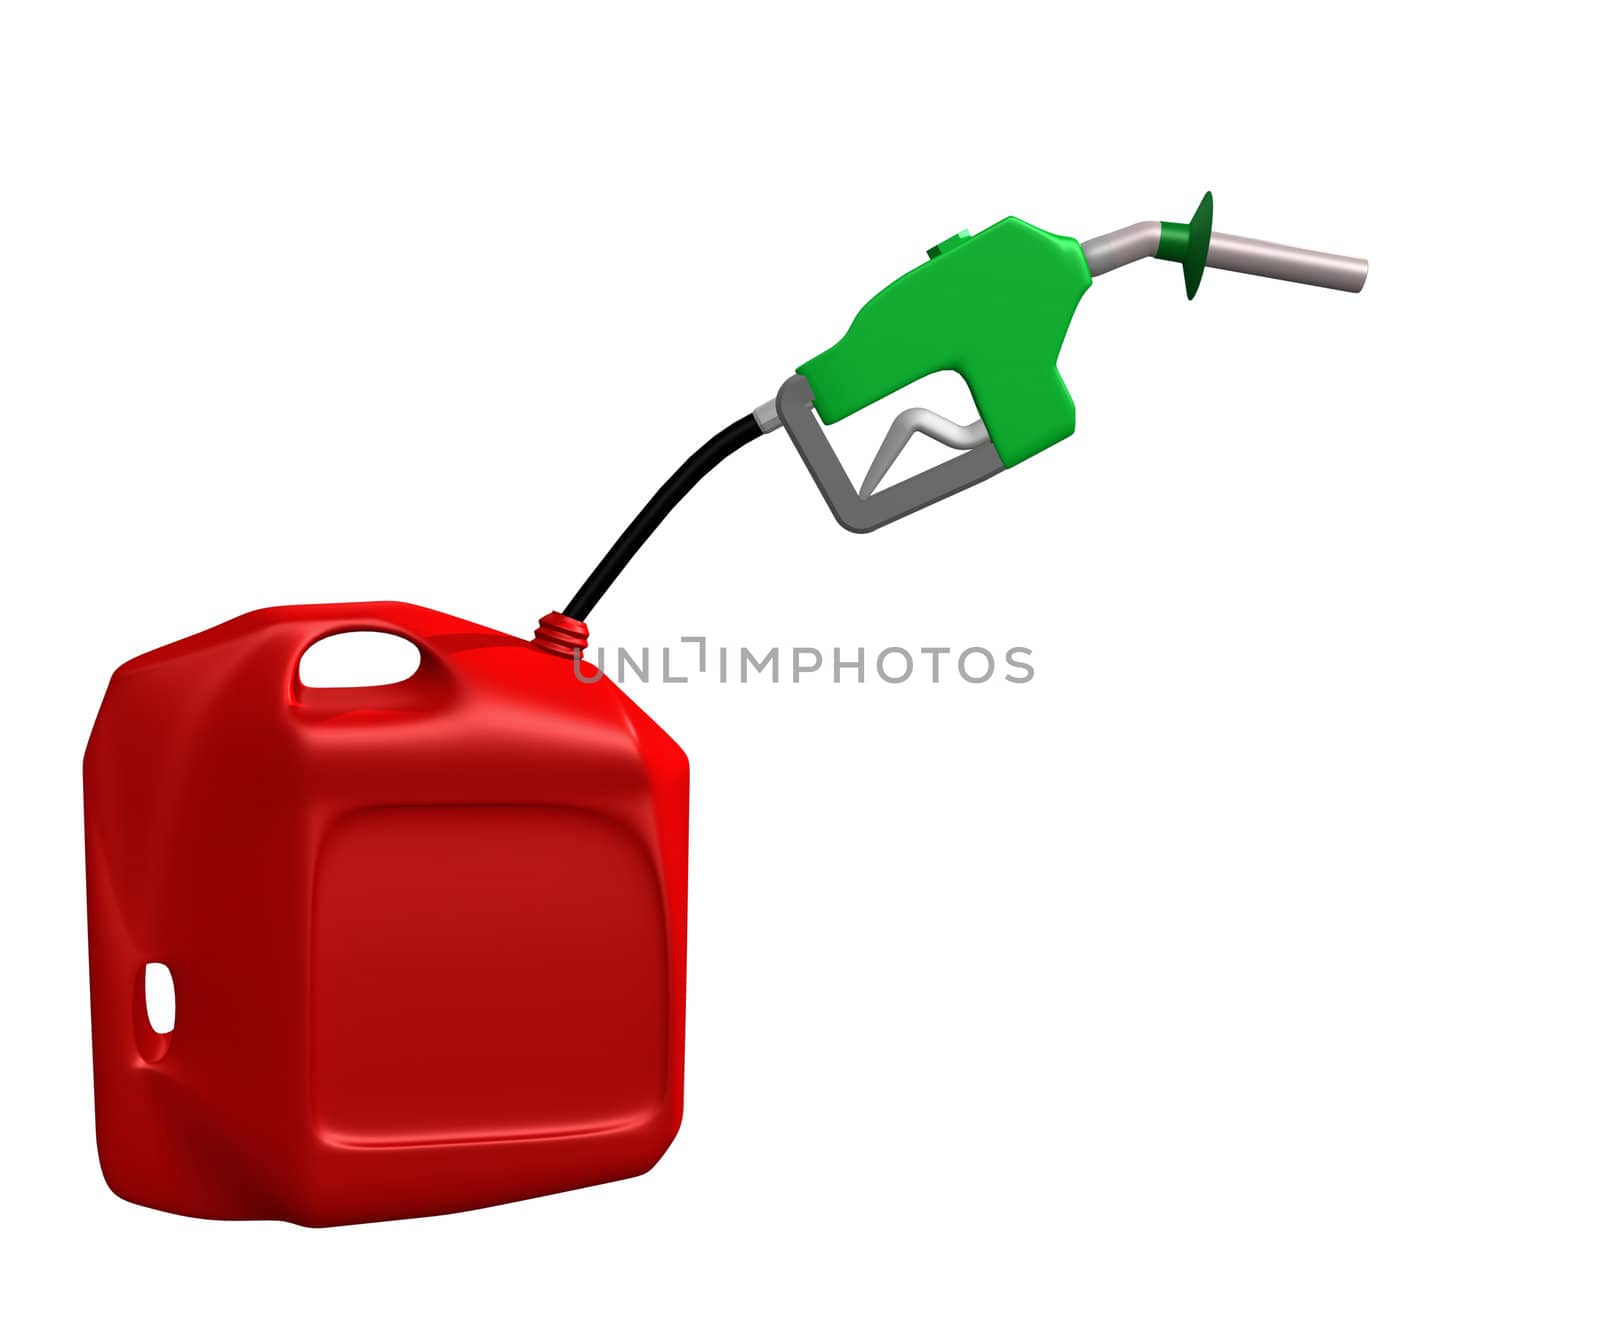 gas concept with green nozzle with hose pumping from red gas can isolated on white